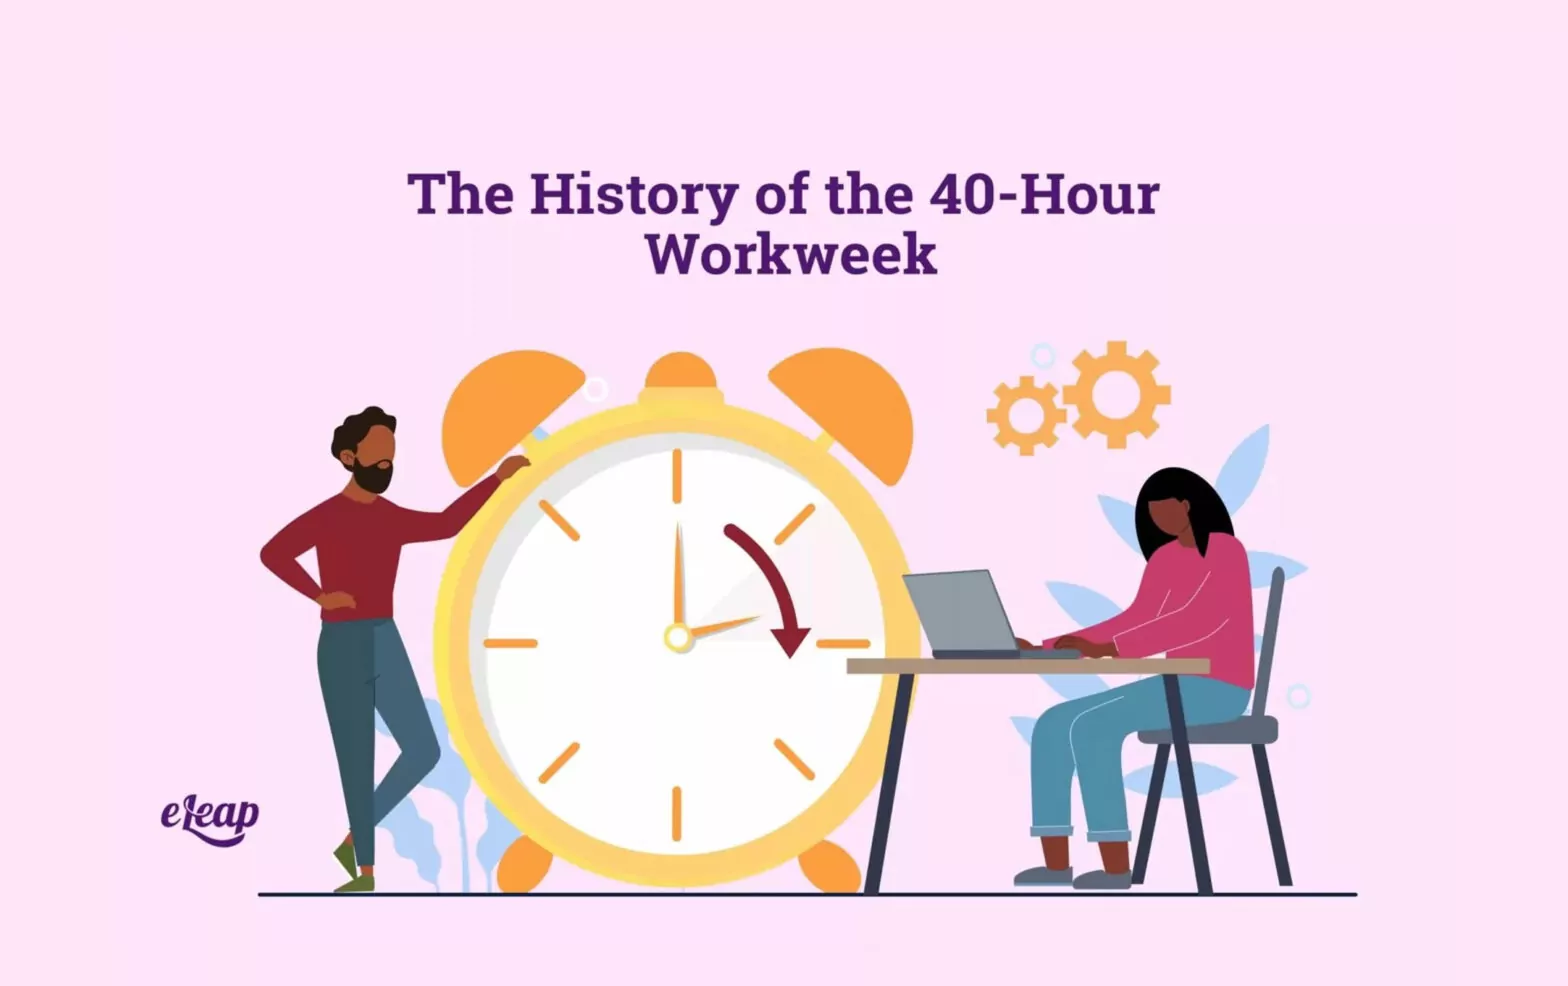 The History of the 40-Hour Workweek